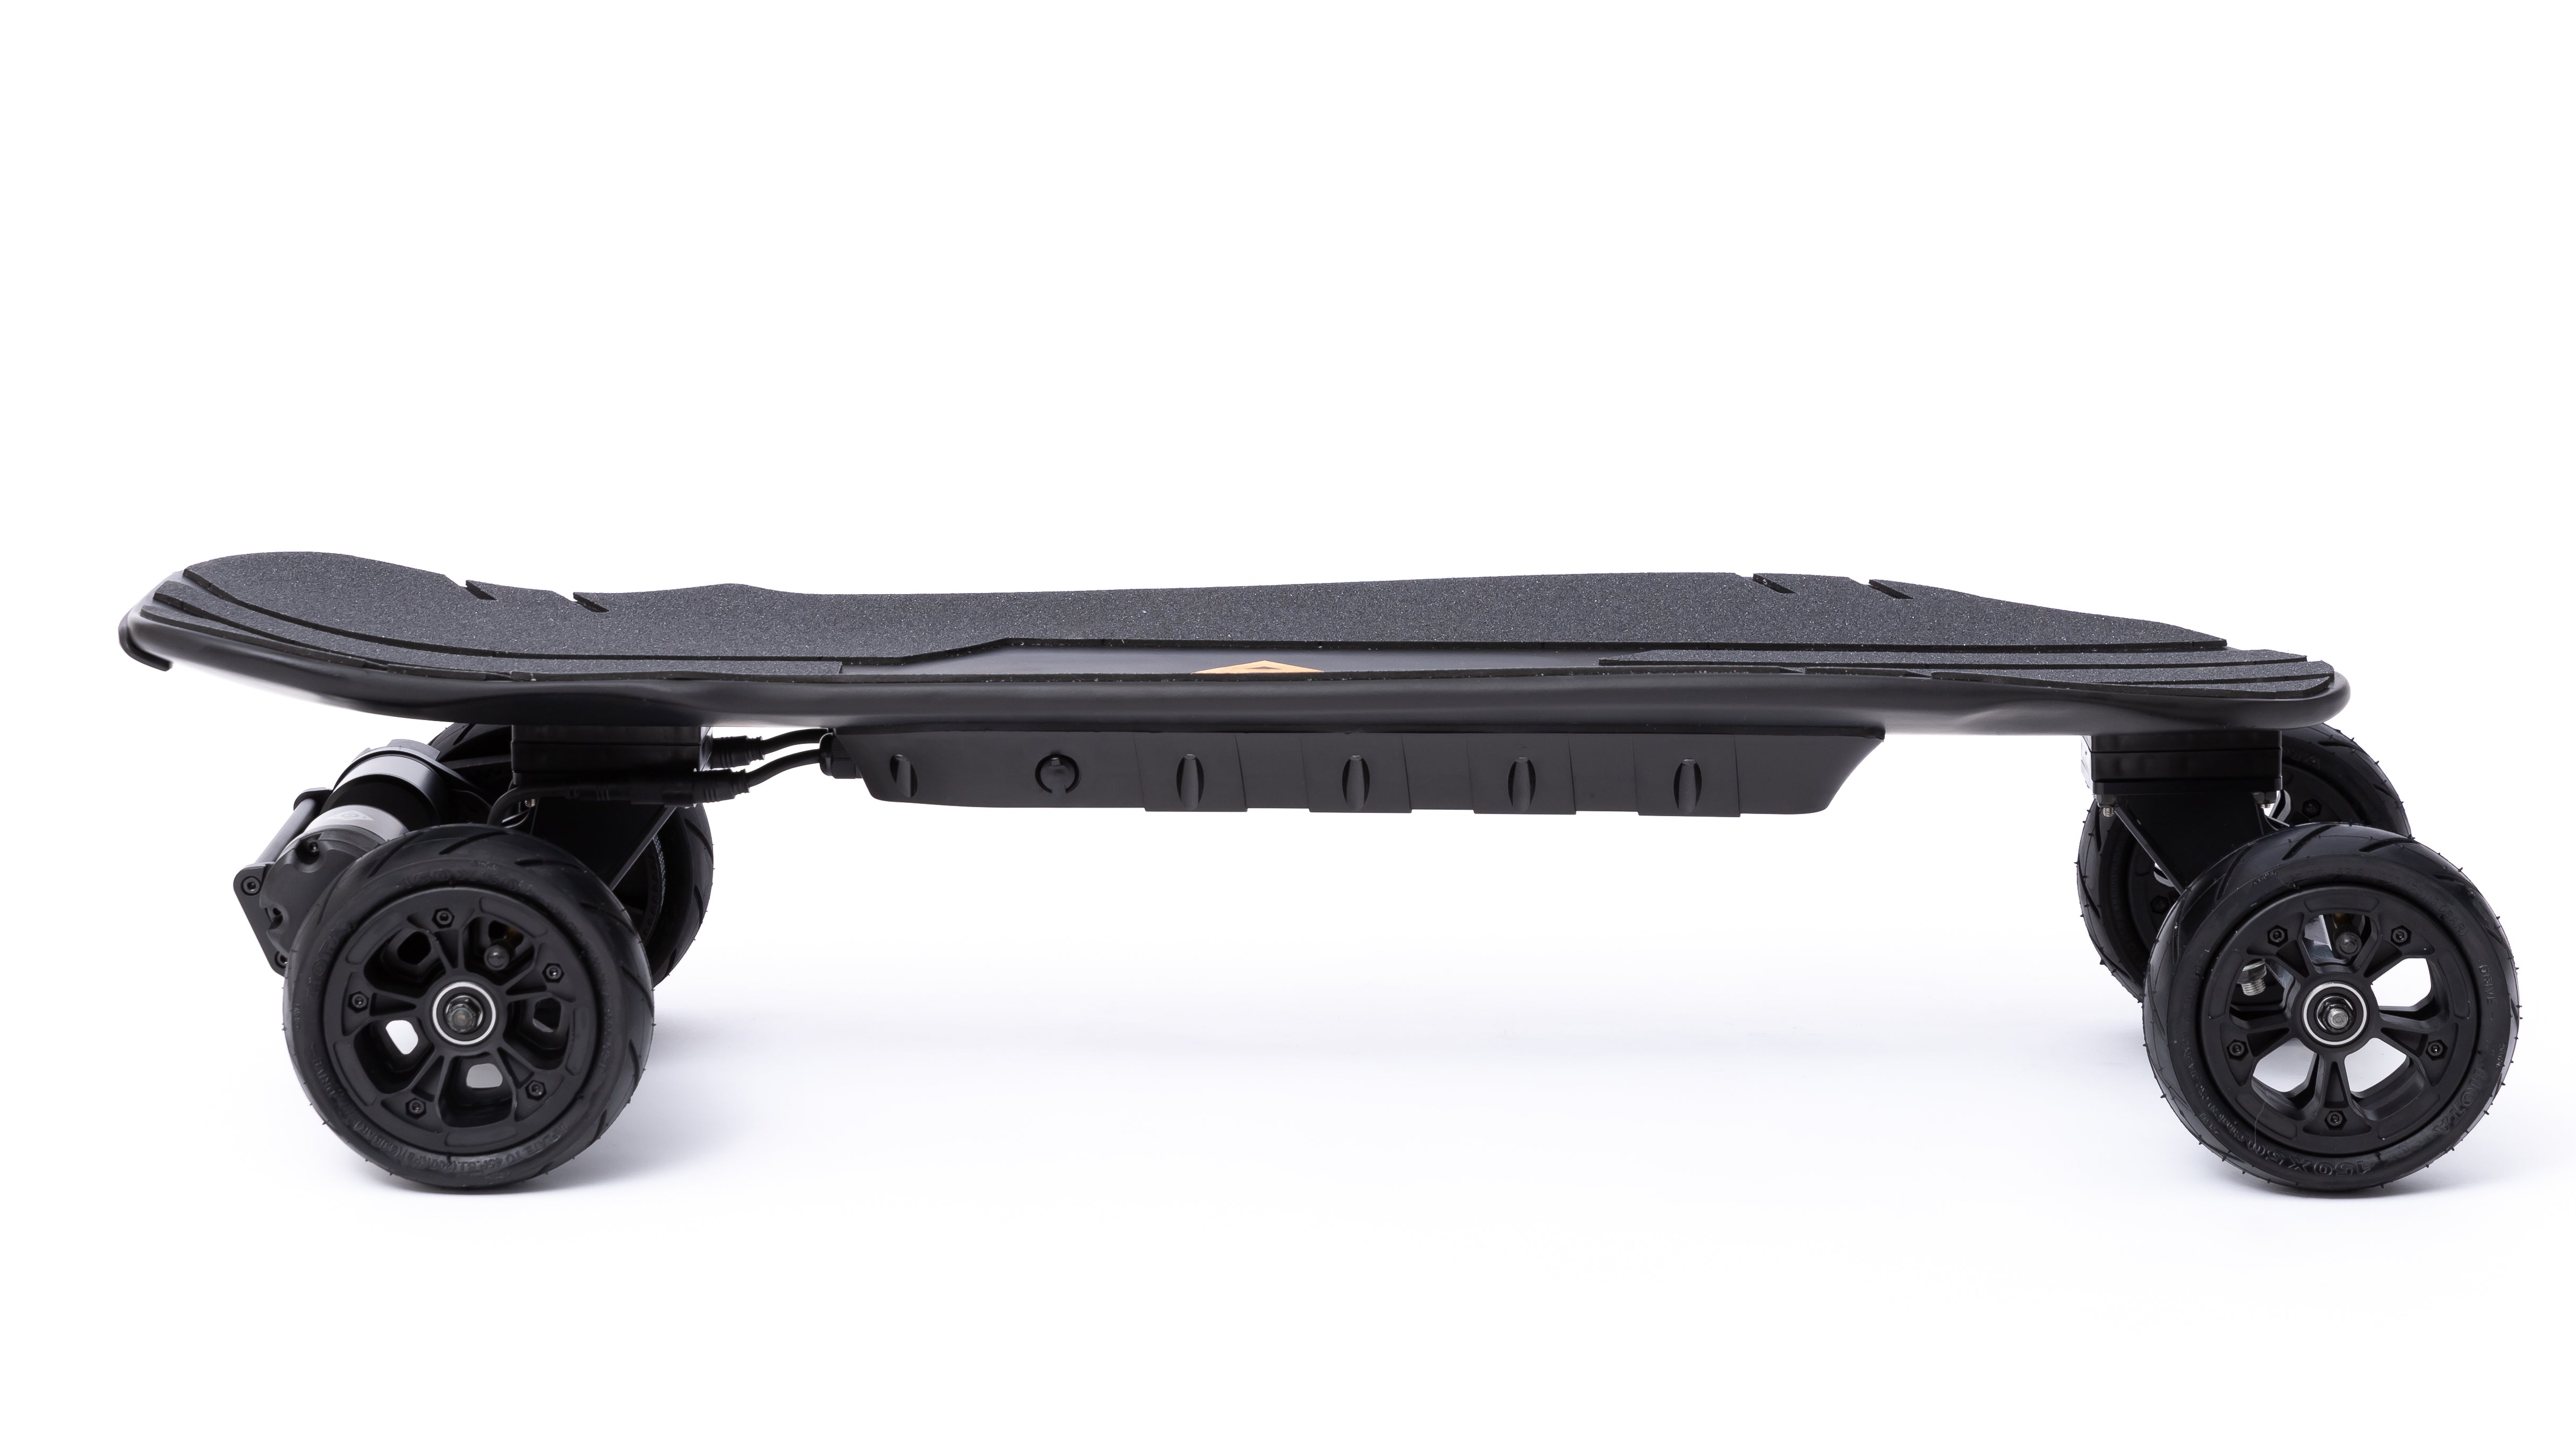 ONSRA Challenger Pro AT electric skateboard